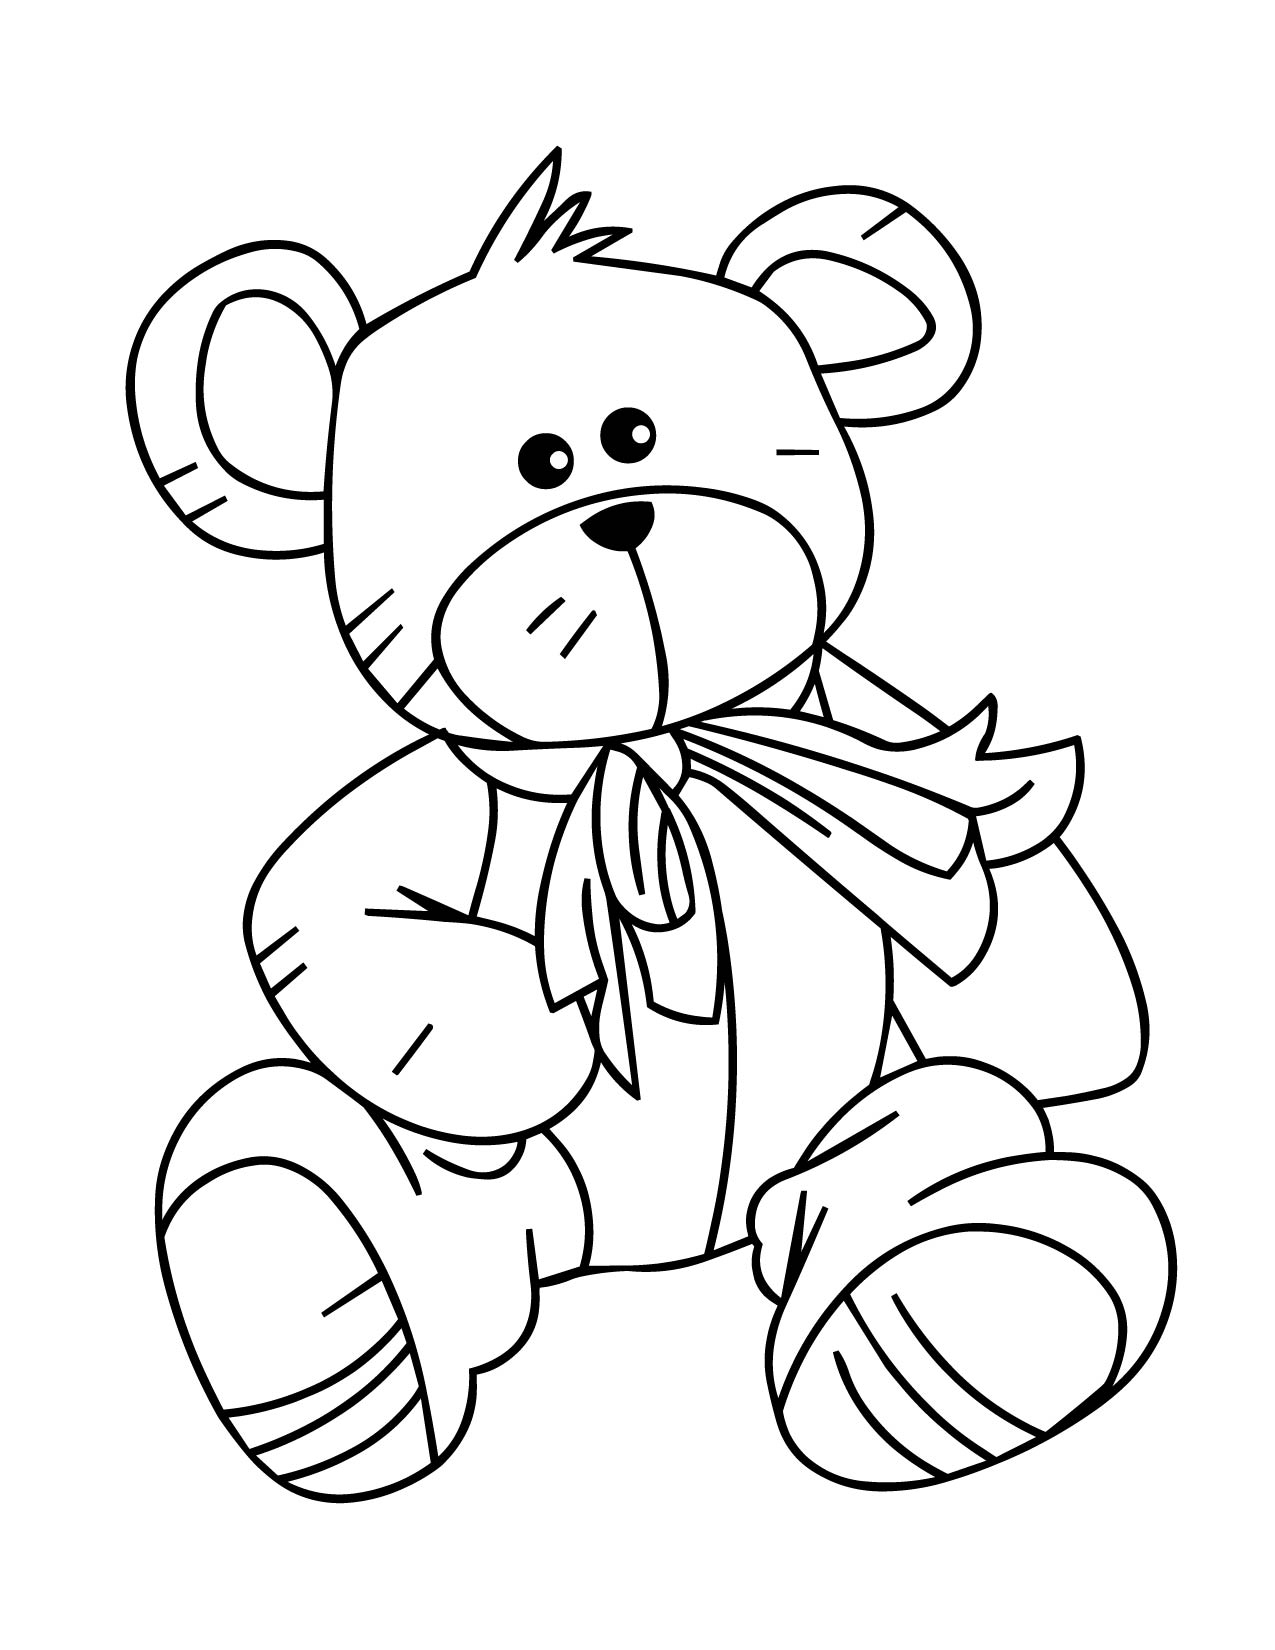 Teddy Bear Coloring Pages | Free coloring pages for kids